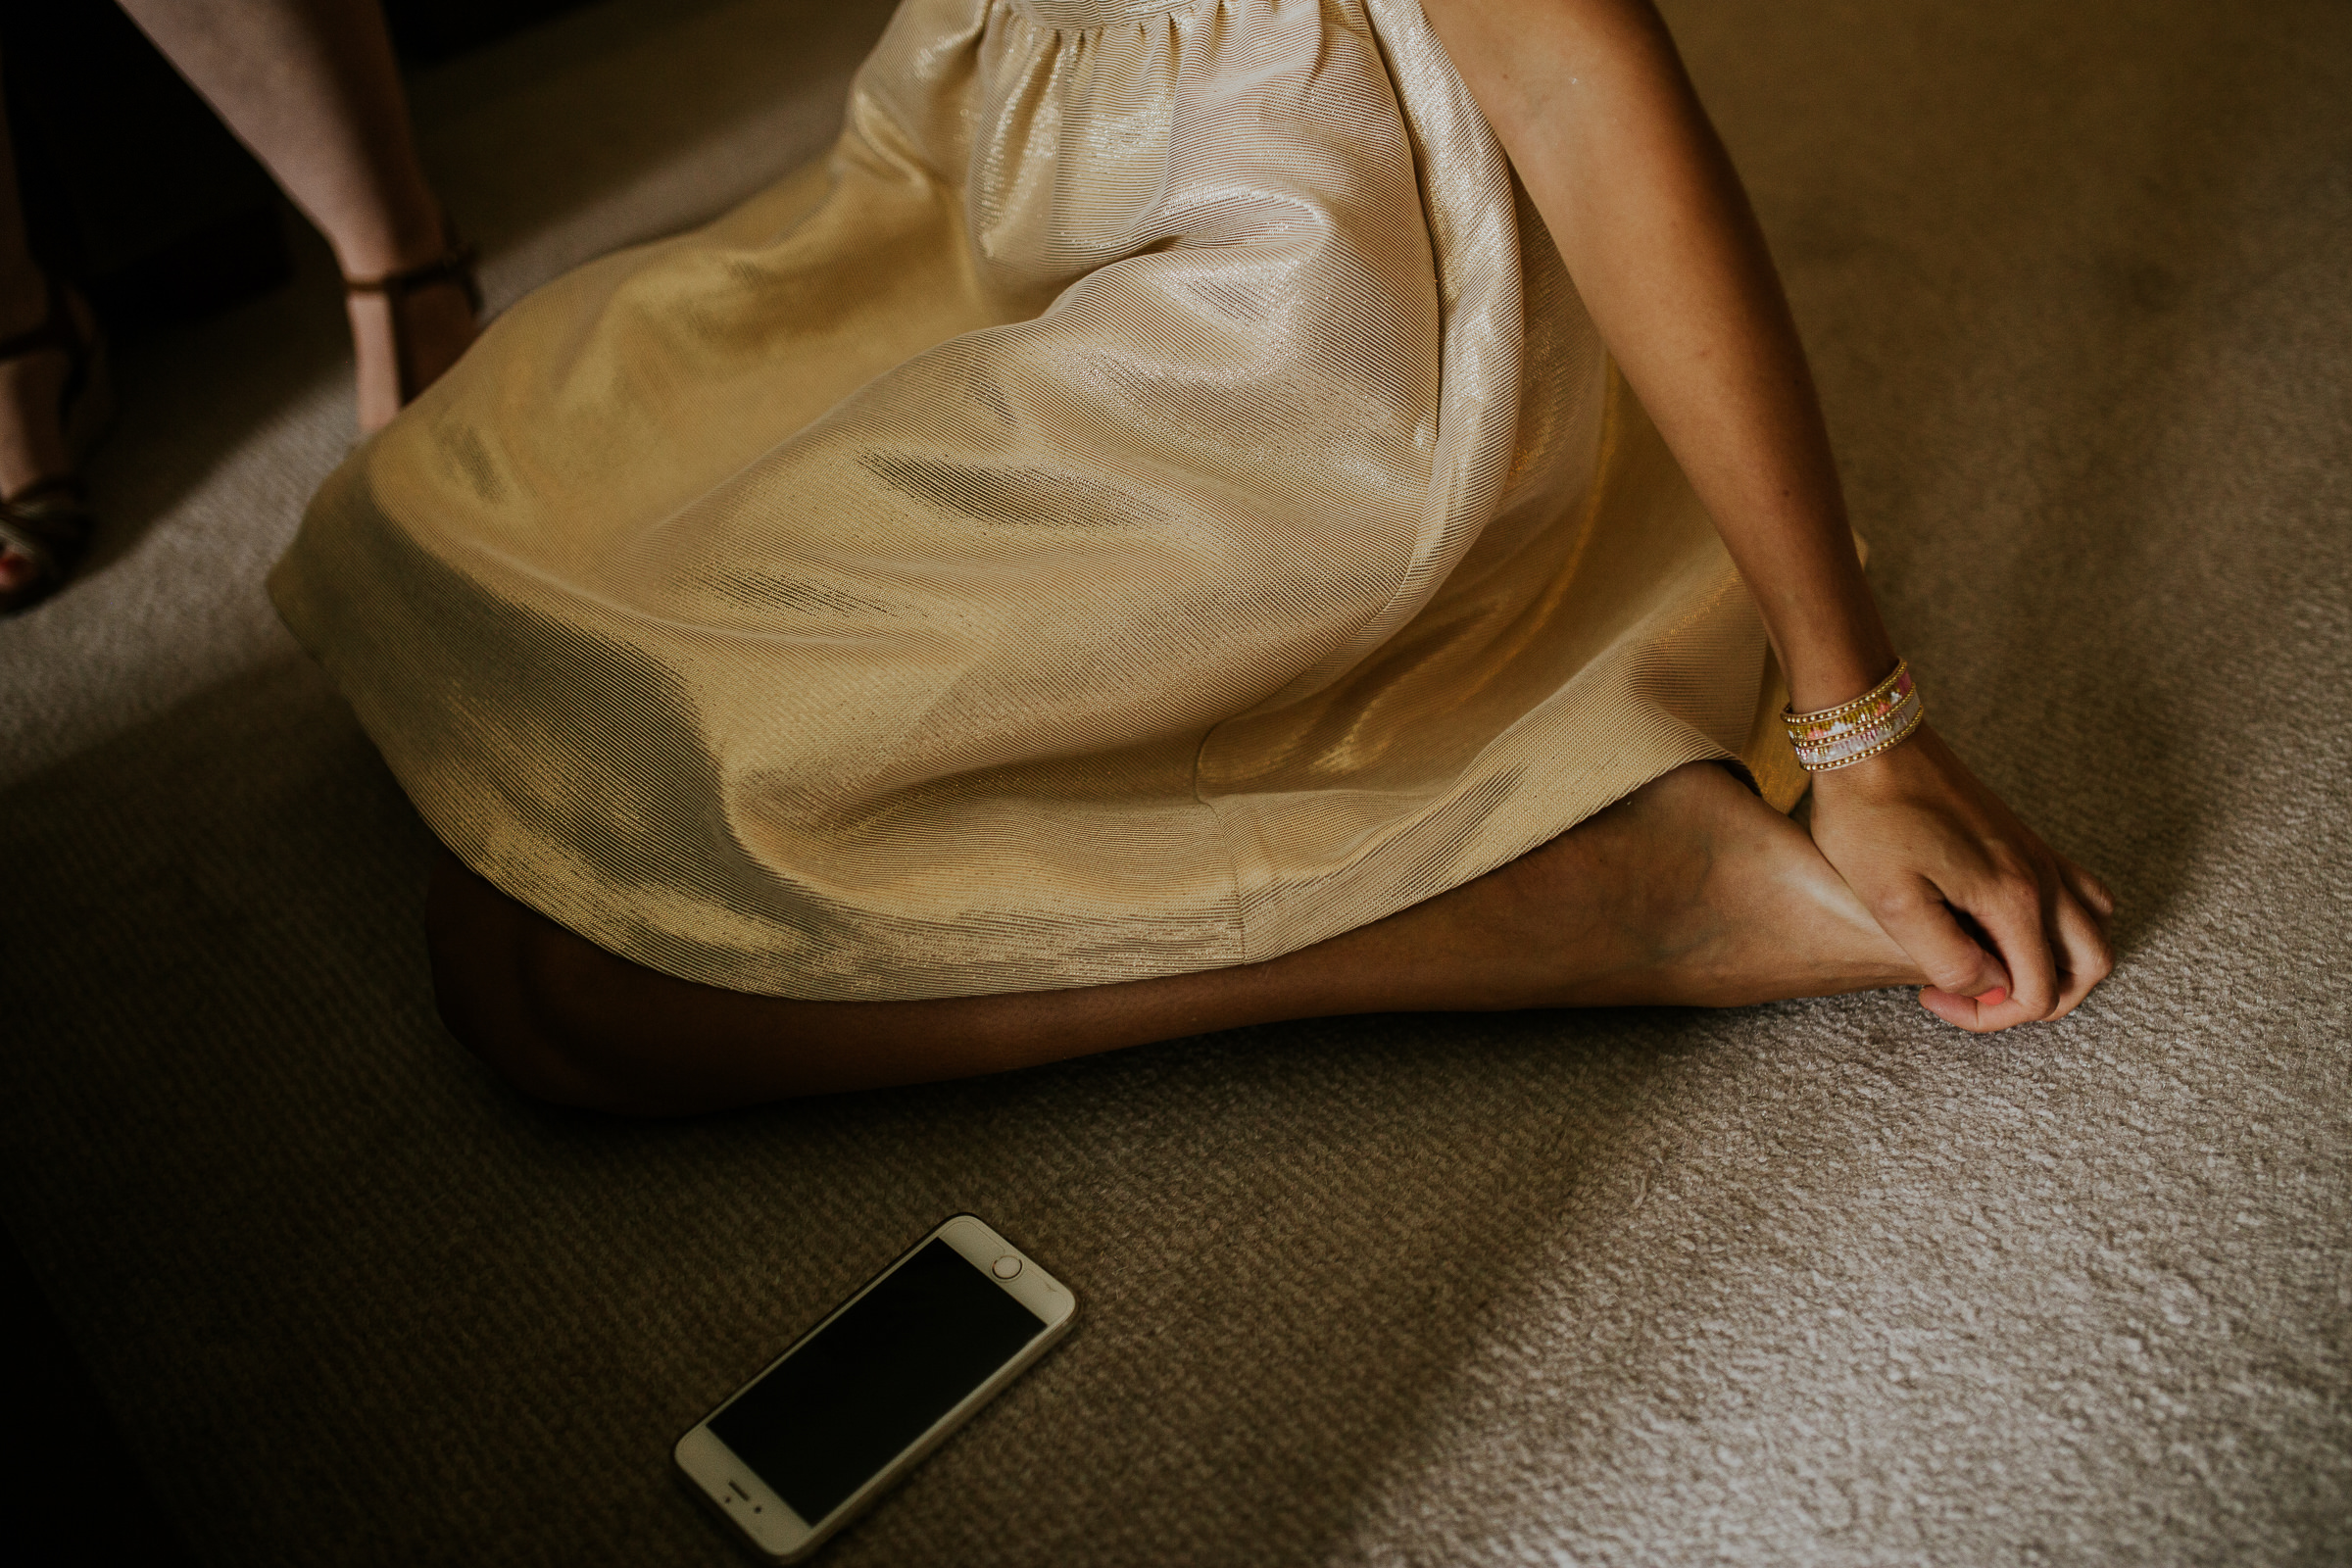 Detail of a bridesmaid dress foot and hand on a carpet floor